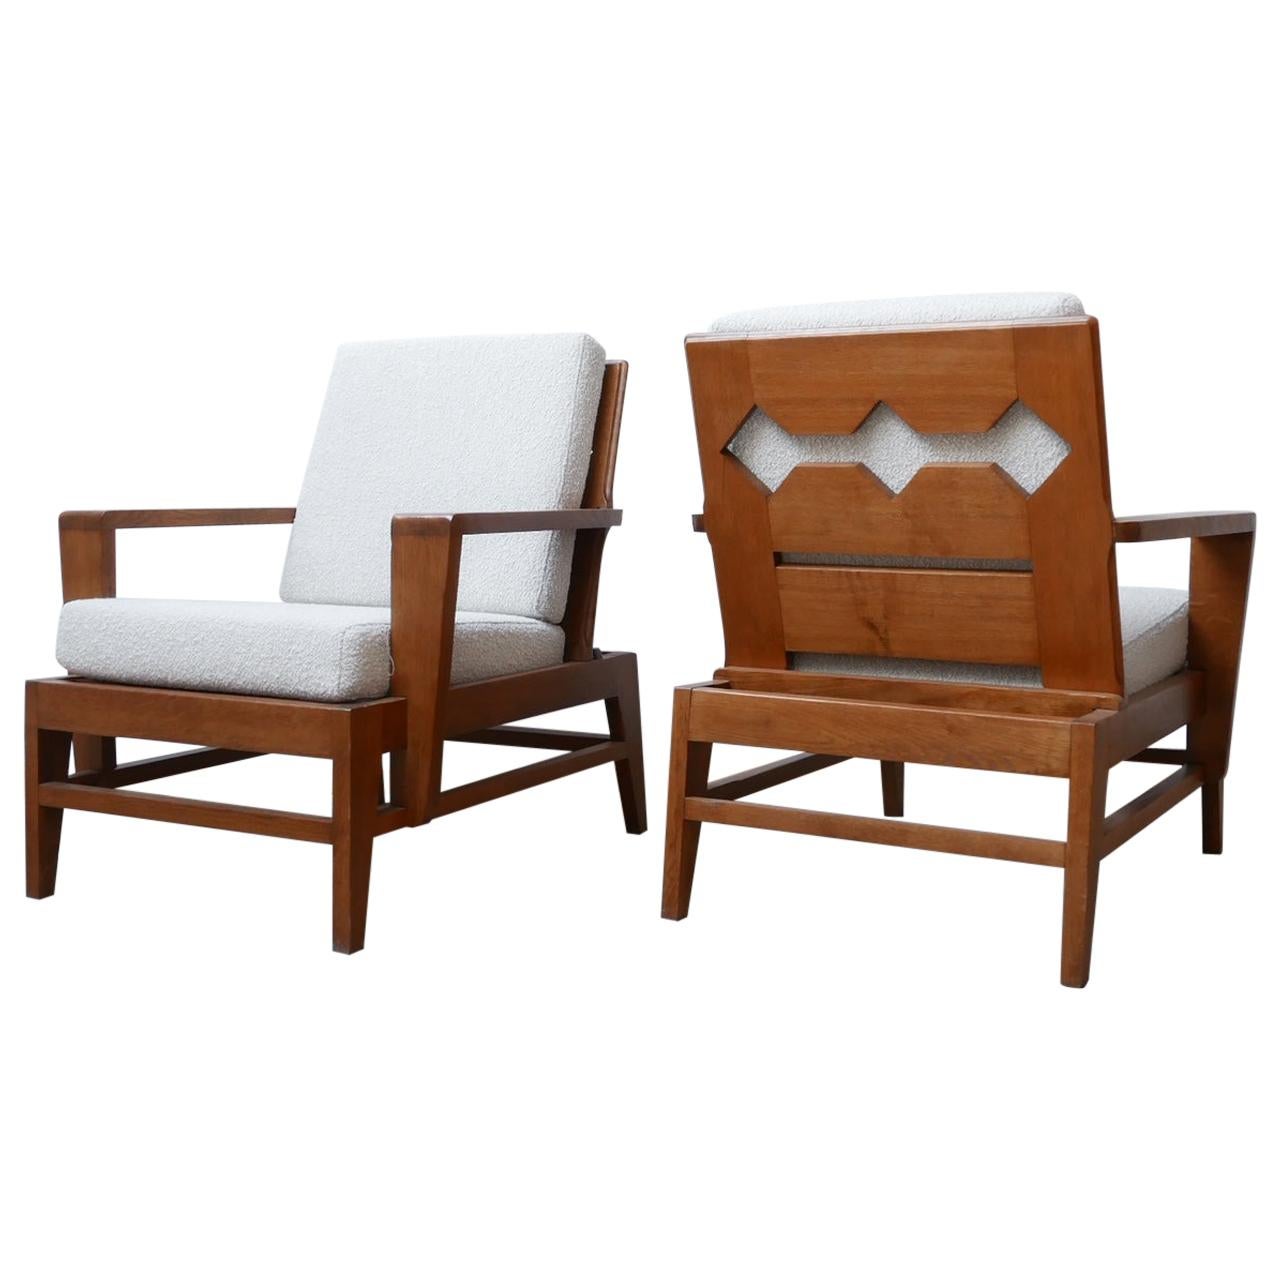 René Gabriel Re-Construction French Midcentury Armchairs